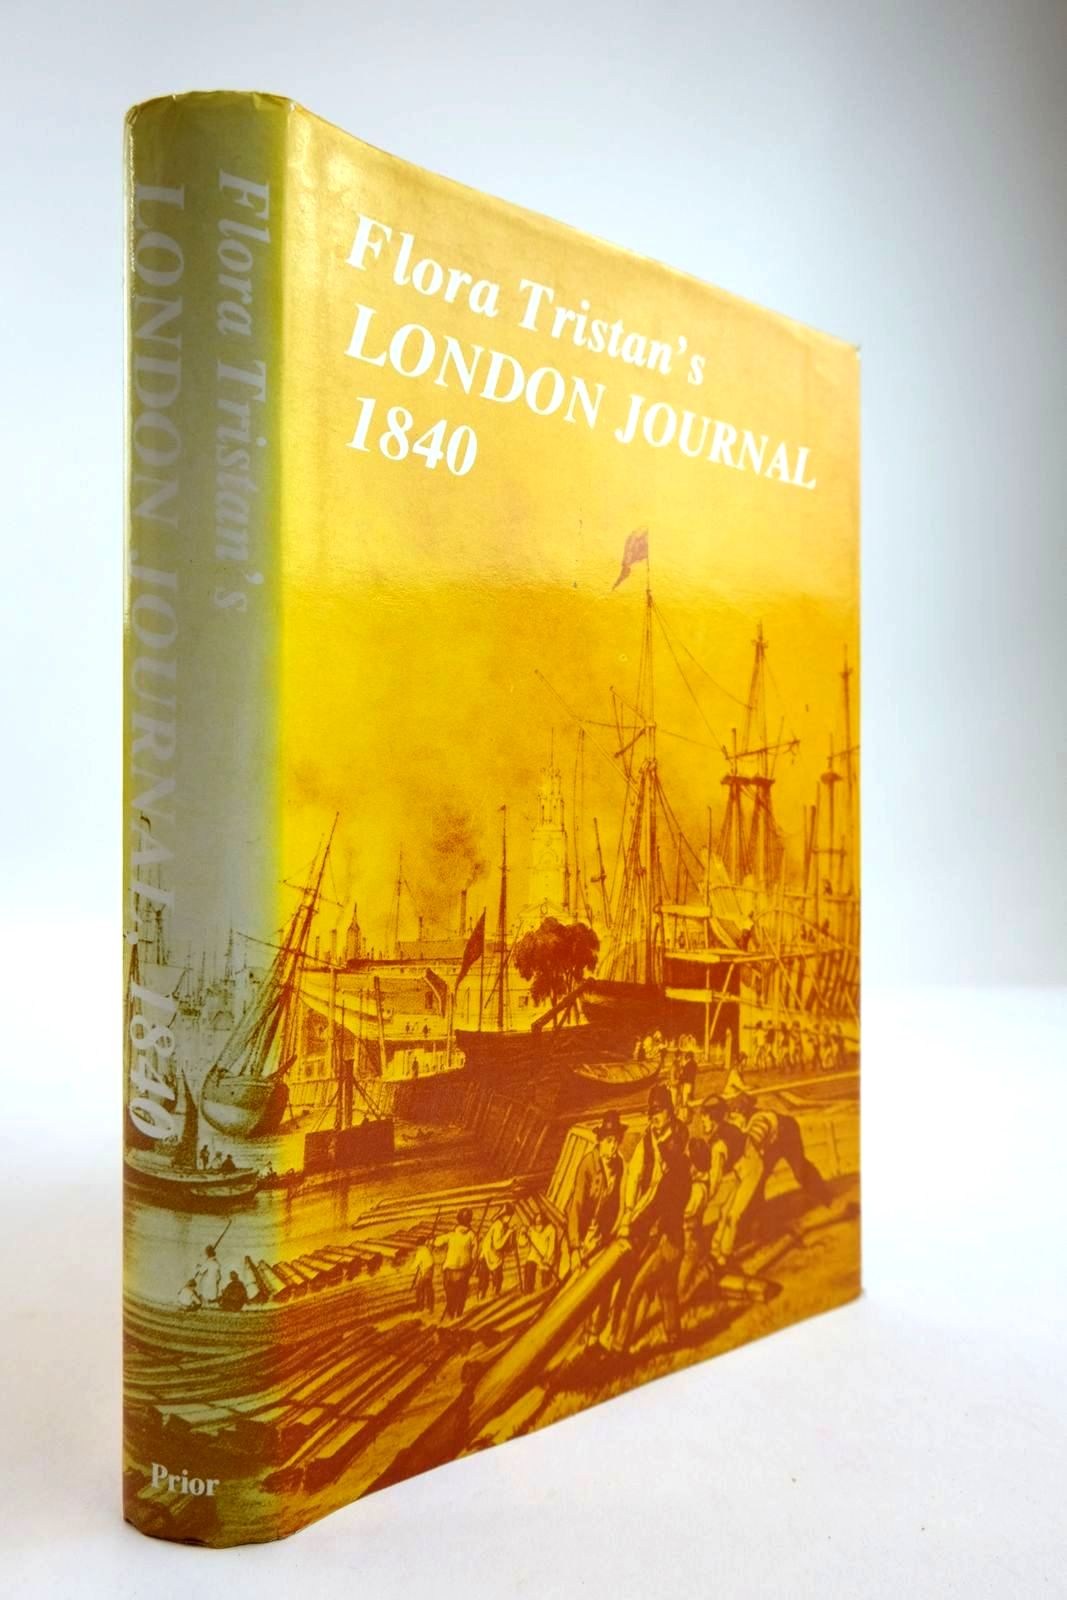 Photo of LONDON JOURNAL: A SURVEY OF LONDON LIFE IN THE 1830S written by Tristan, Flora published by Goerge Prior (STOCK CODE: 2133989)  for sale by Stella & Rose's Books